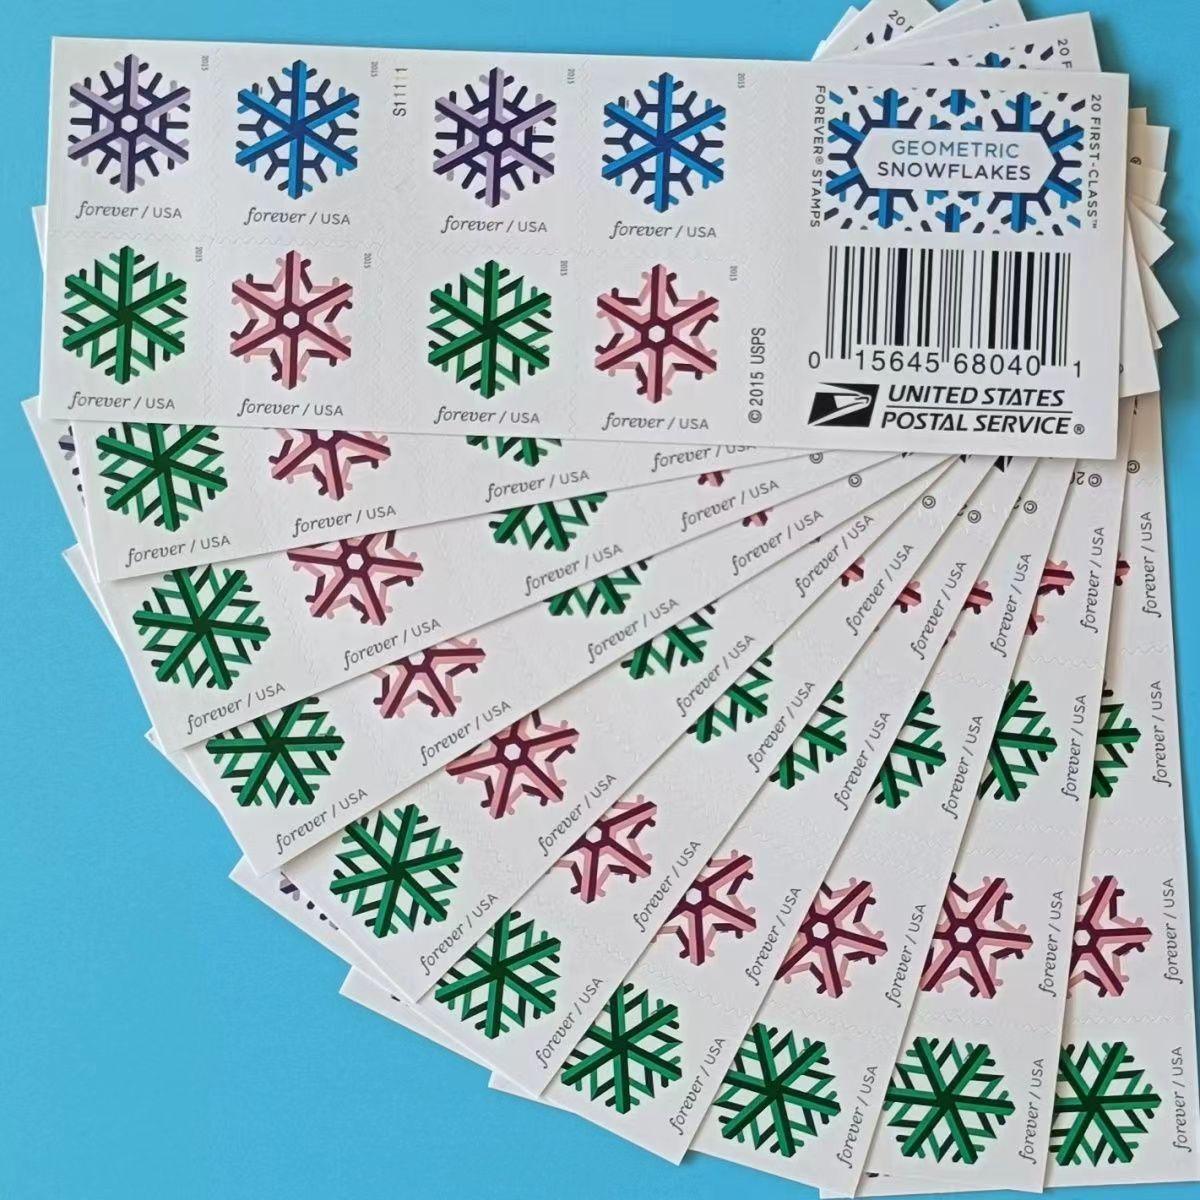 A sheet of Geometric Snowflakes 2015 postage stamps with colorful geometric snowflake designs against a light blue background.